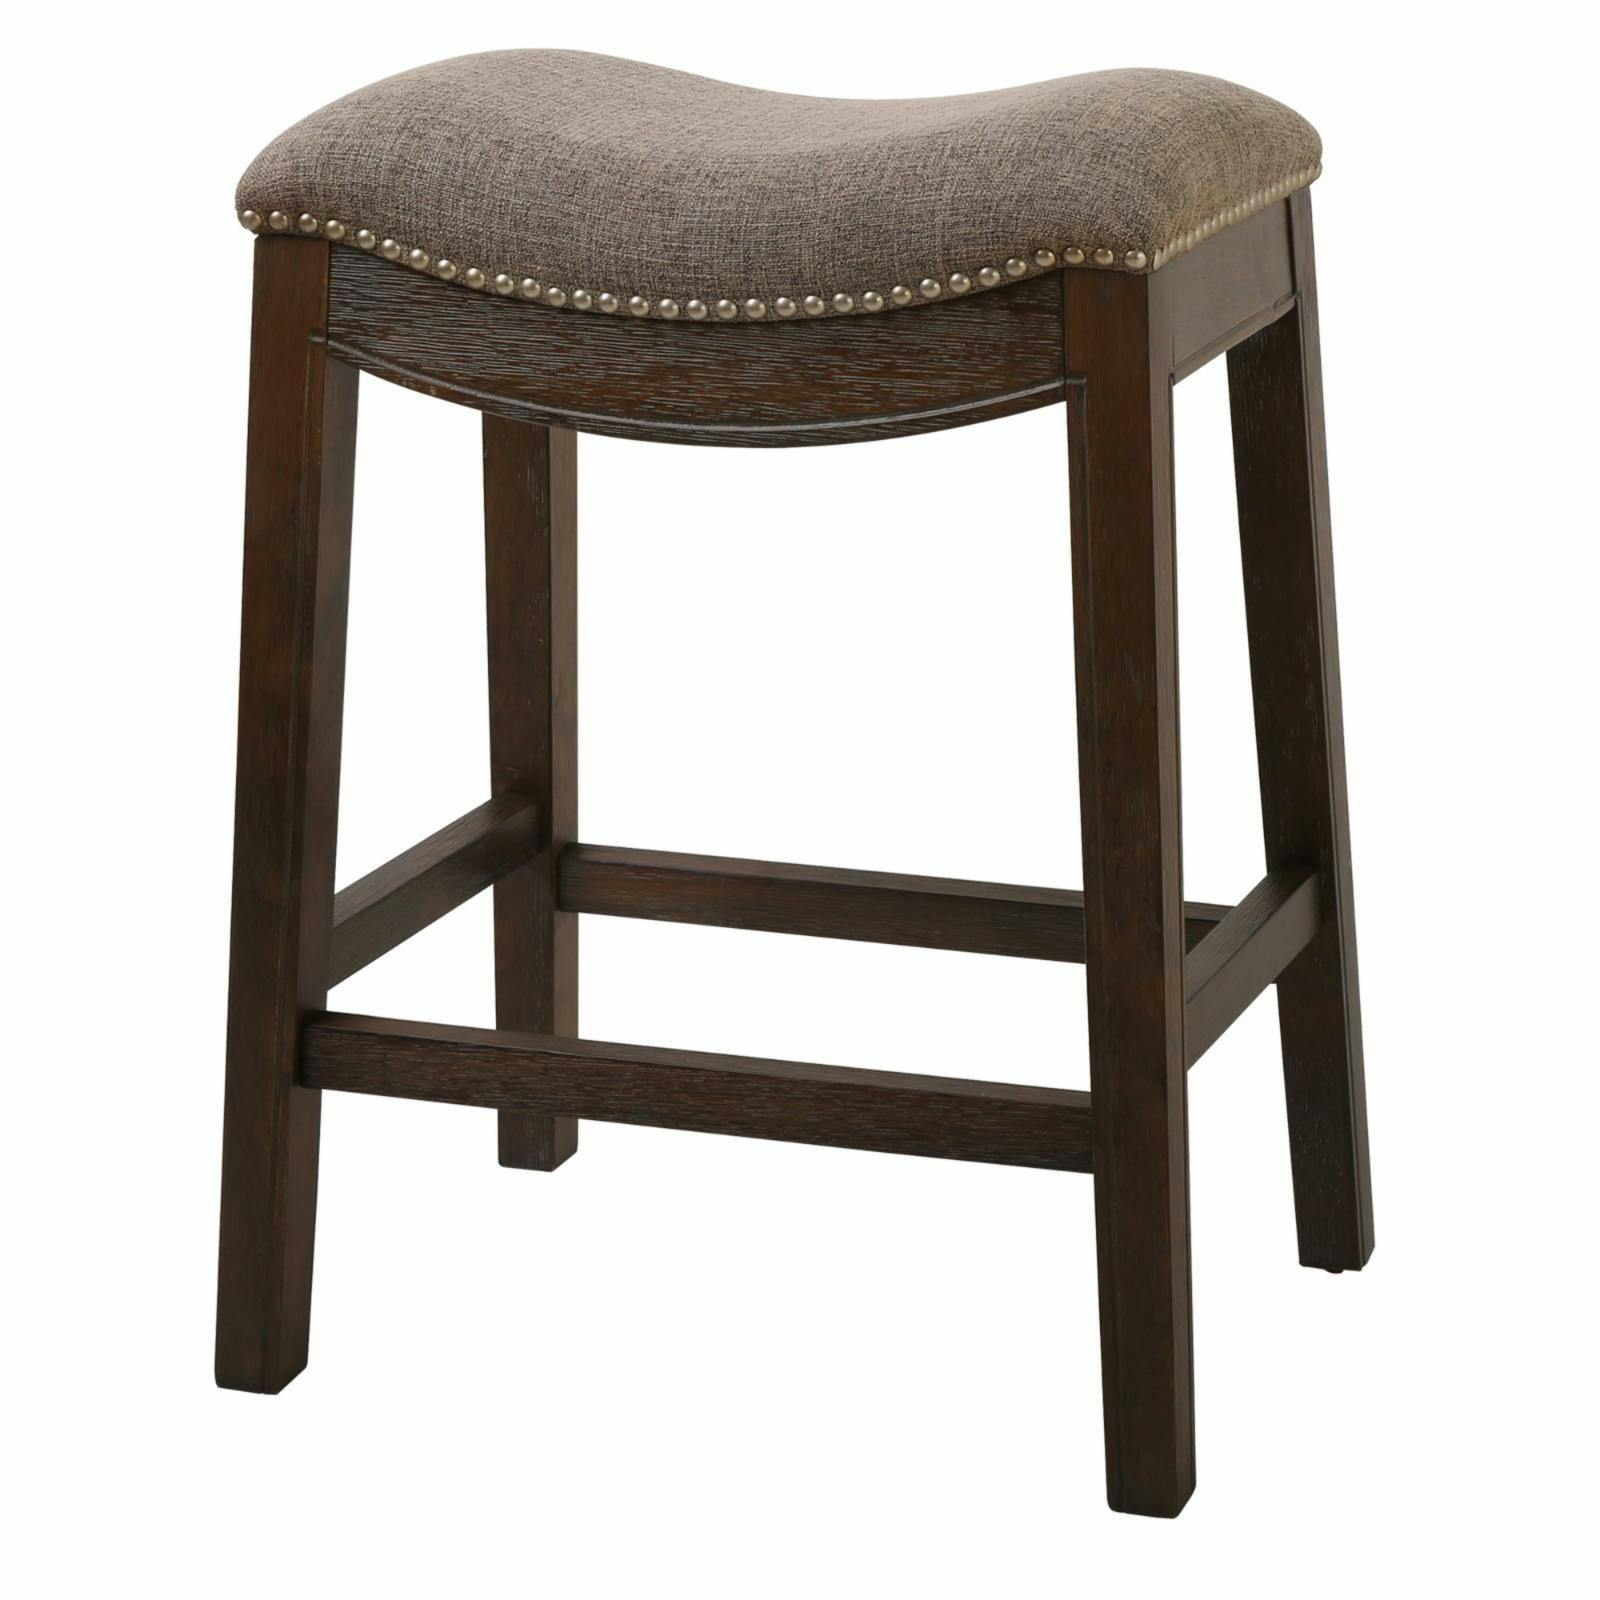 25" Saddle Style Wood Counter Stool in Cobble Gray with Nailhead Accents